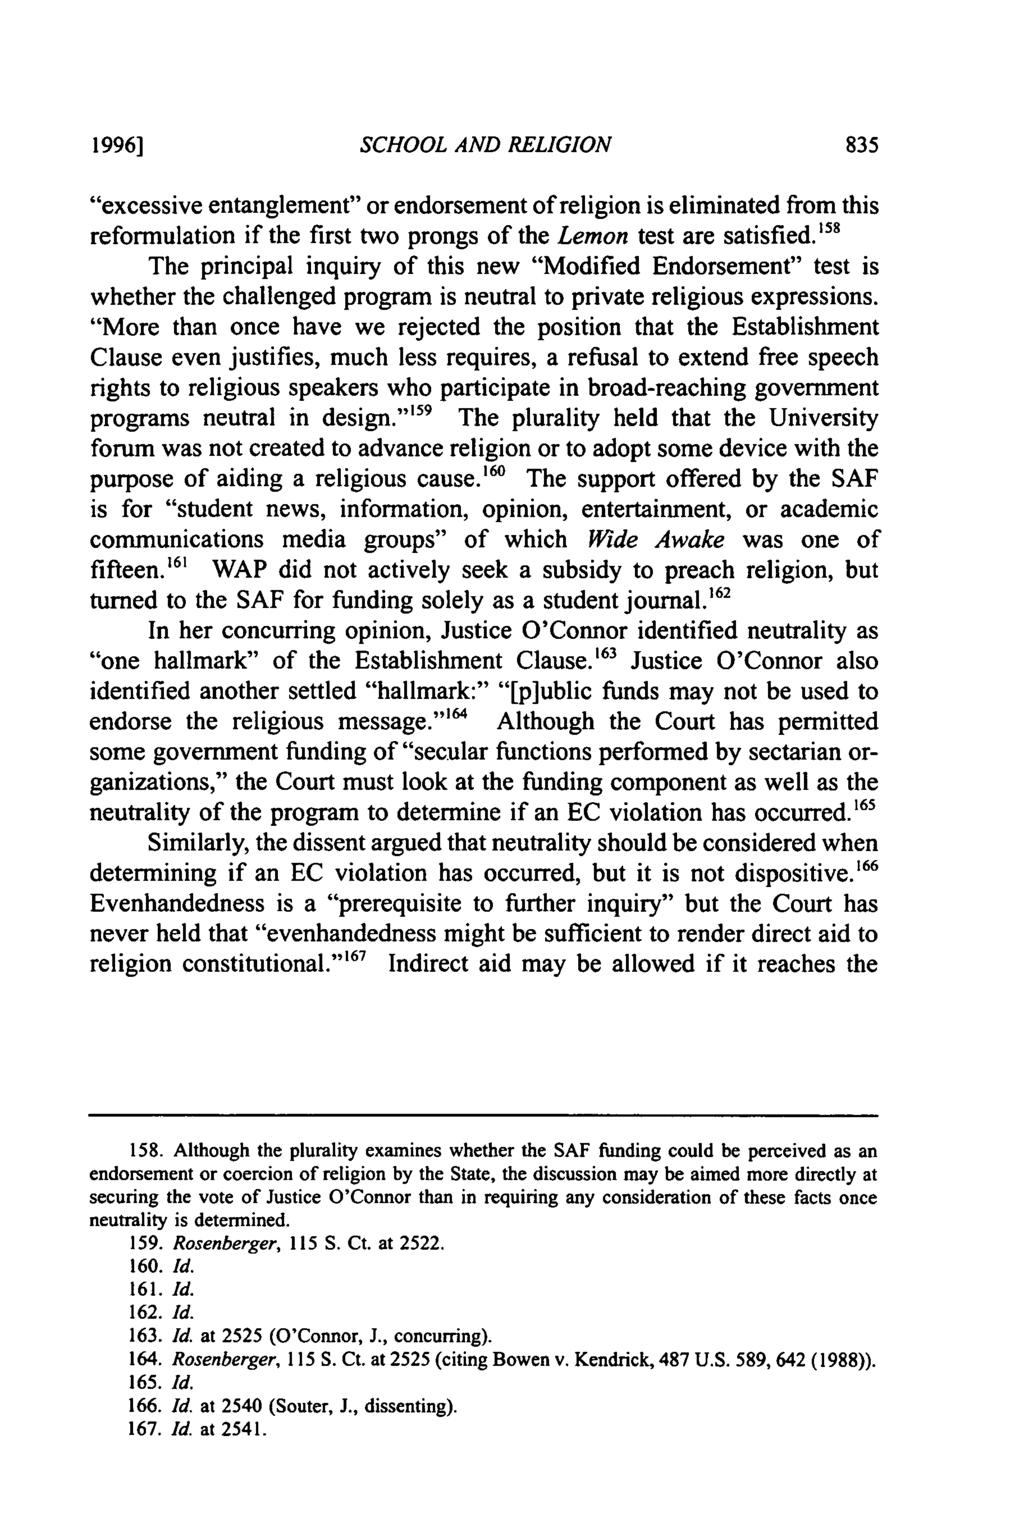 1996] SCHOOL AND RELIGION "excessive entanglement" or endorsement of religion is eliminated from this reformulation if the first two prongs of the Lemon test are satisfied.